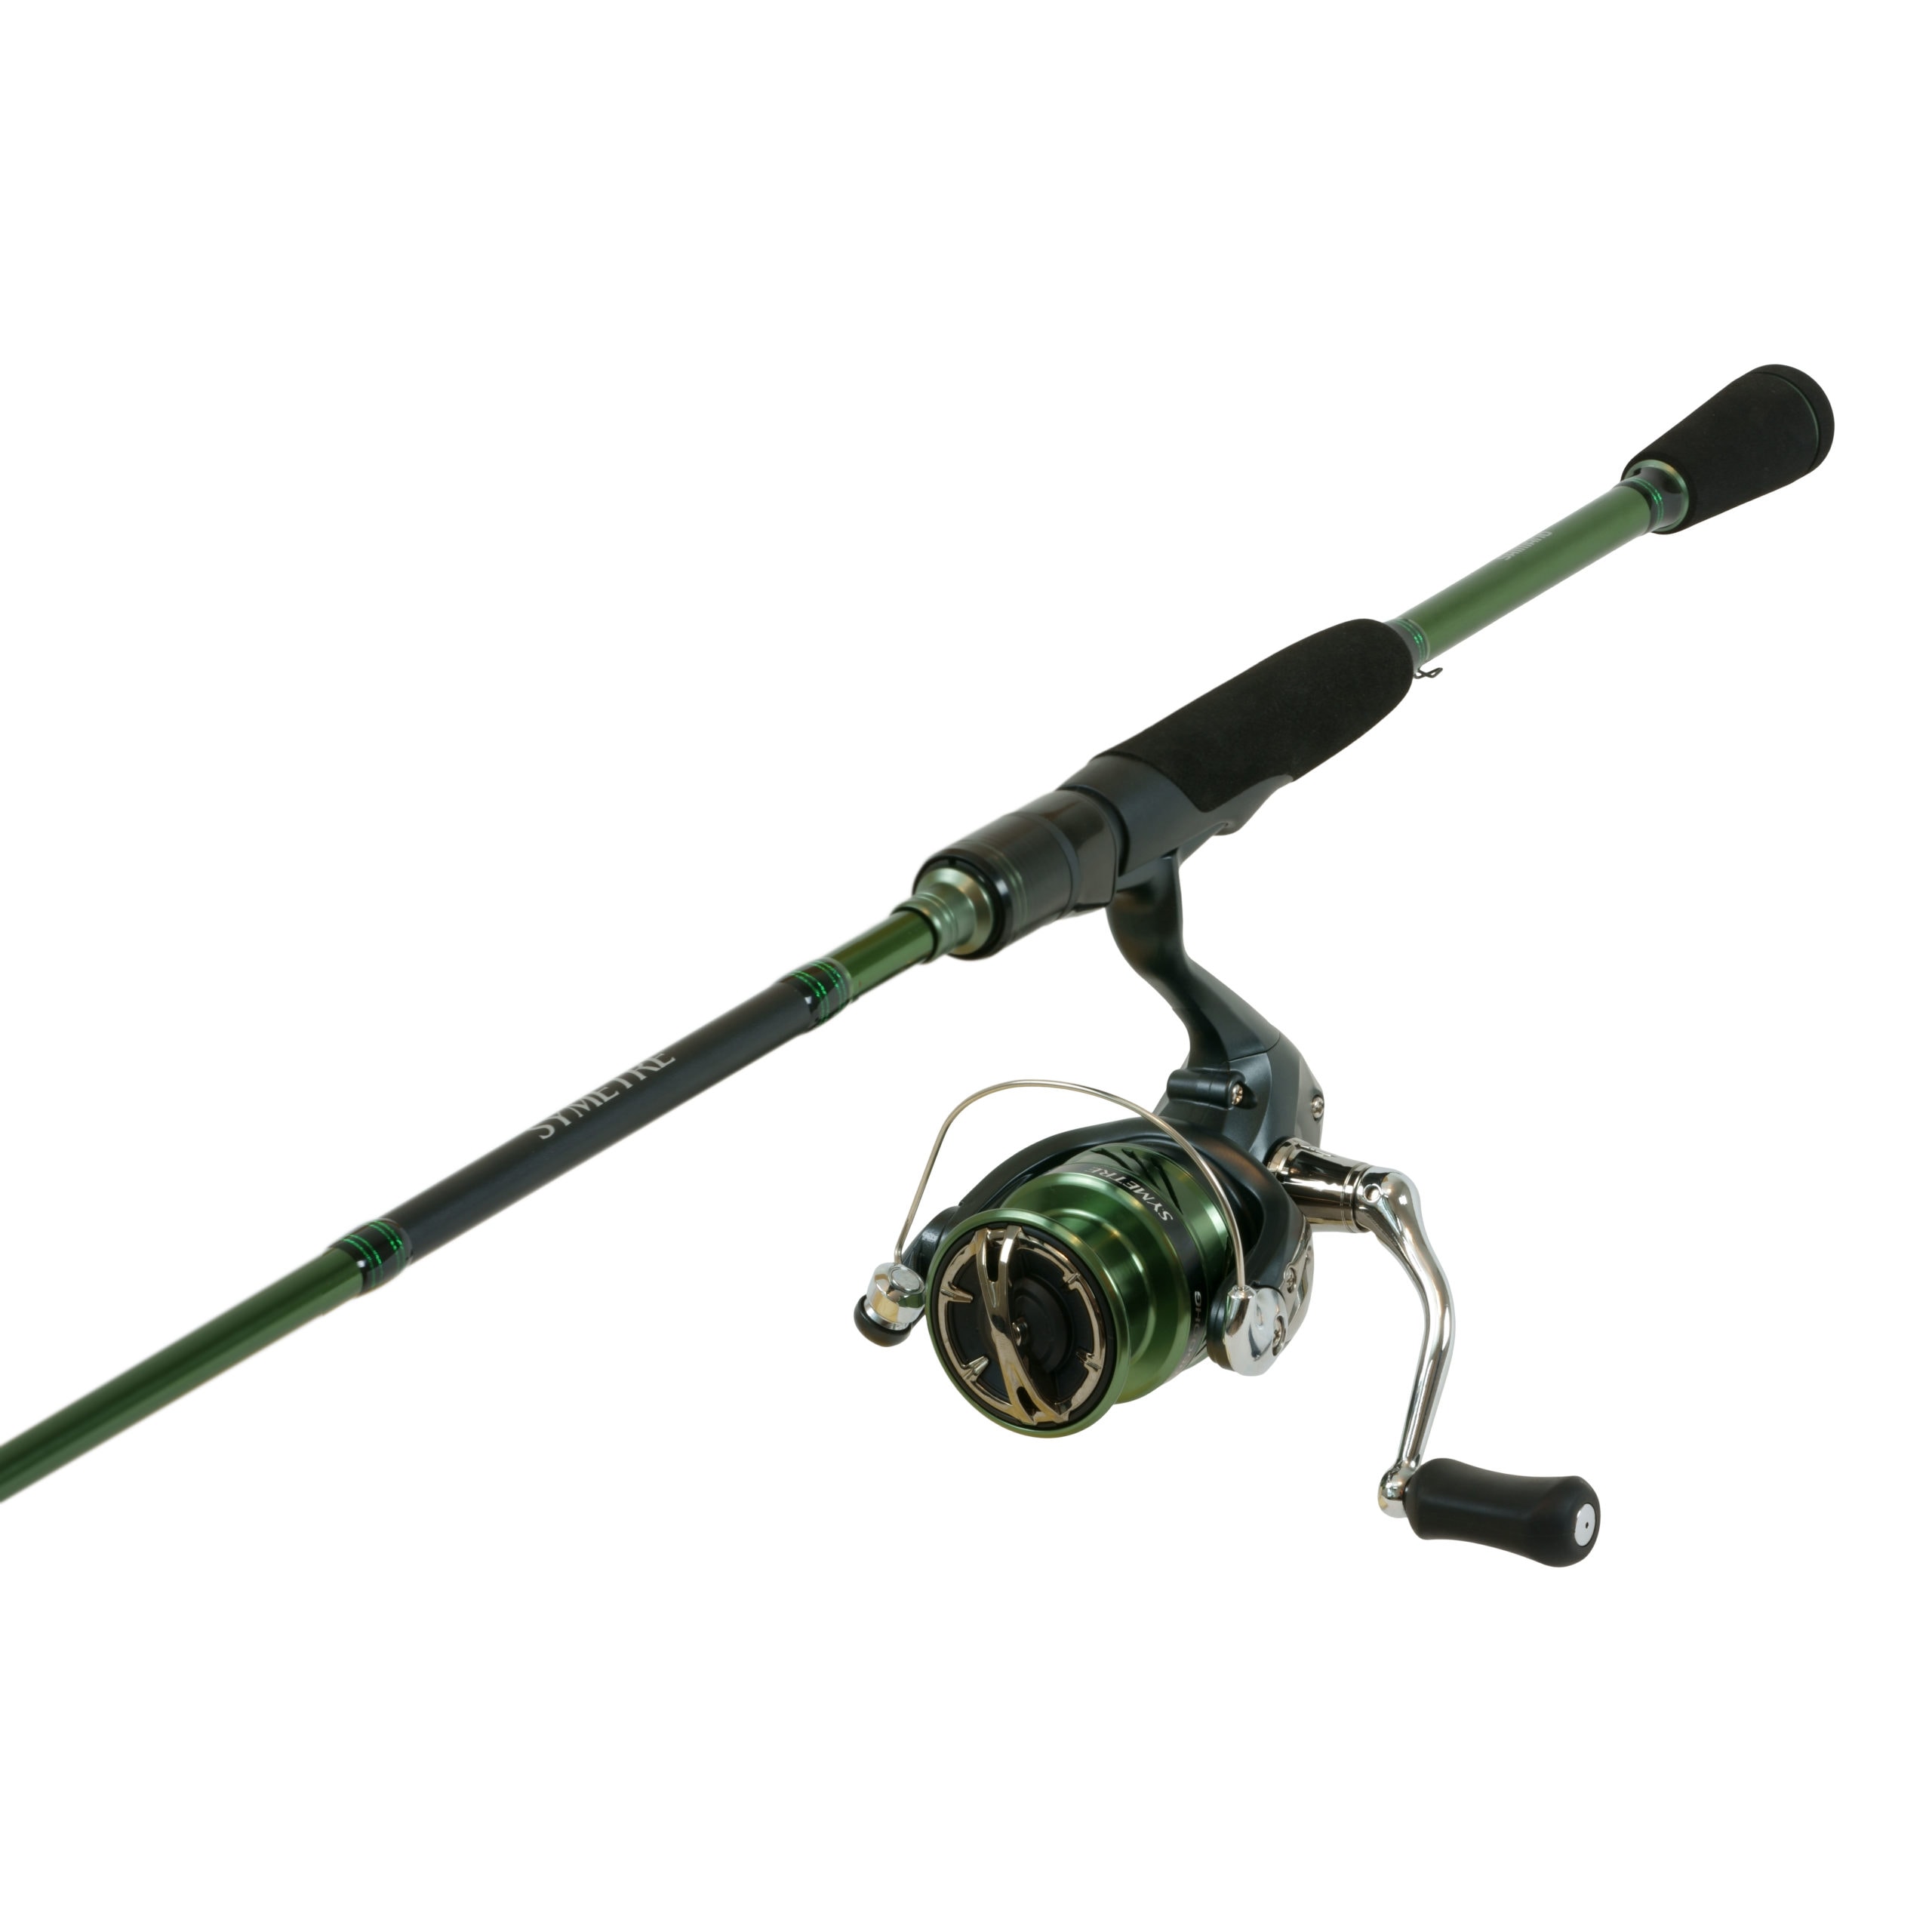 ICAST 2020: Shimano Symetre Spinning Combos